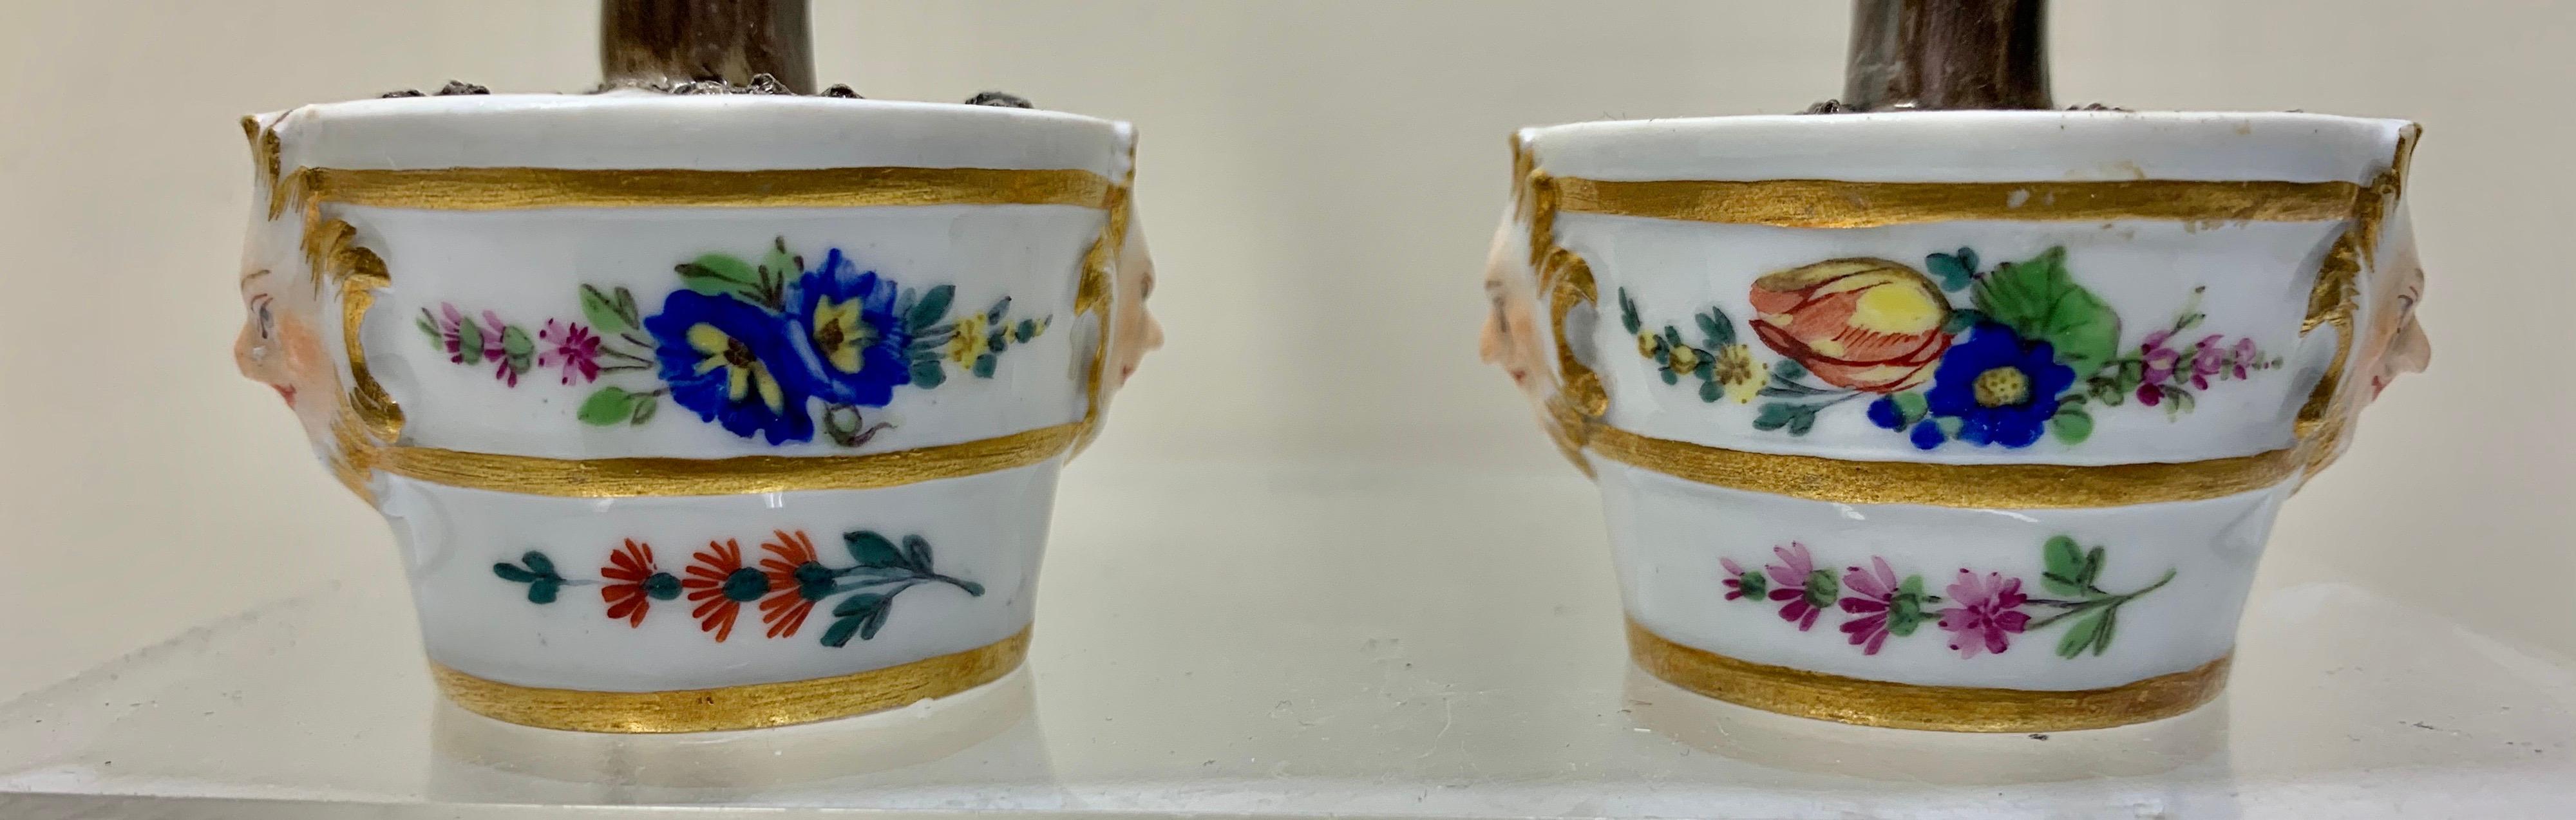 Late 18th Century Rare Pair Meissen Marcolini Lemon Trees in Tubs Circa 1790 Porcelain For Sale